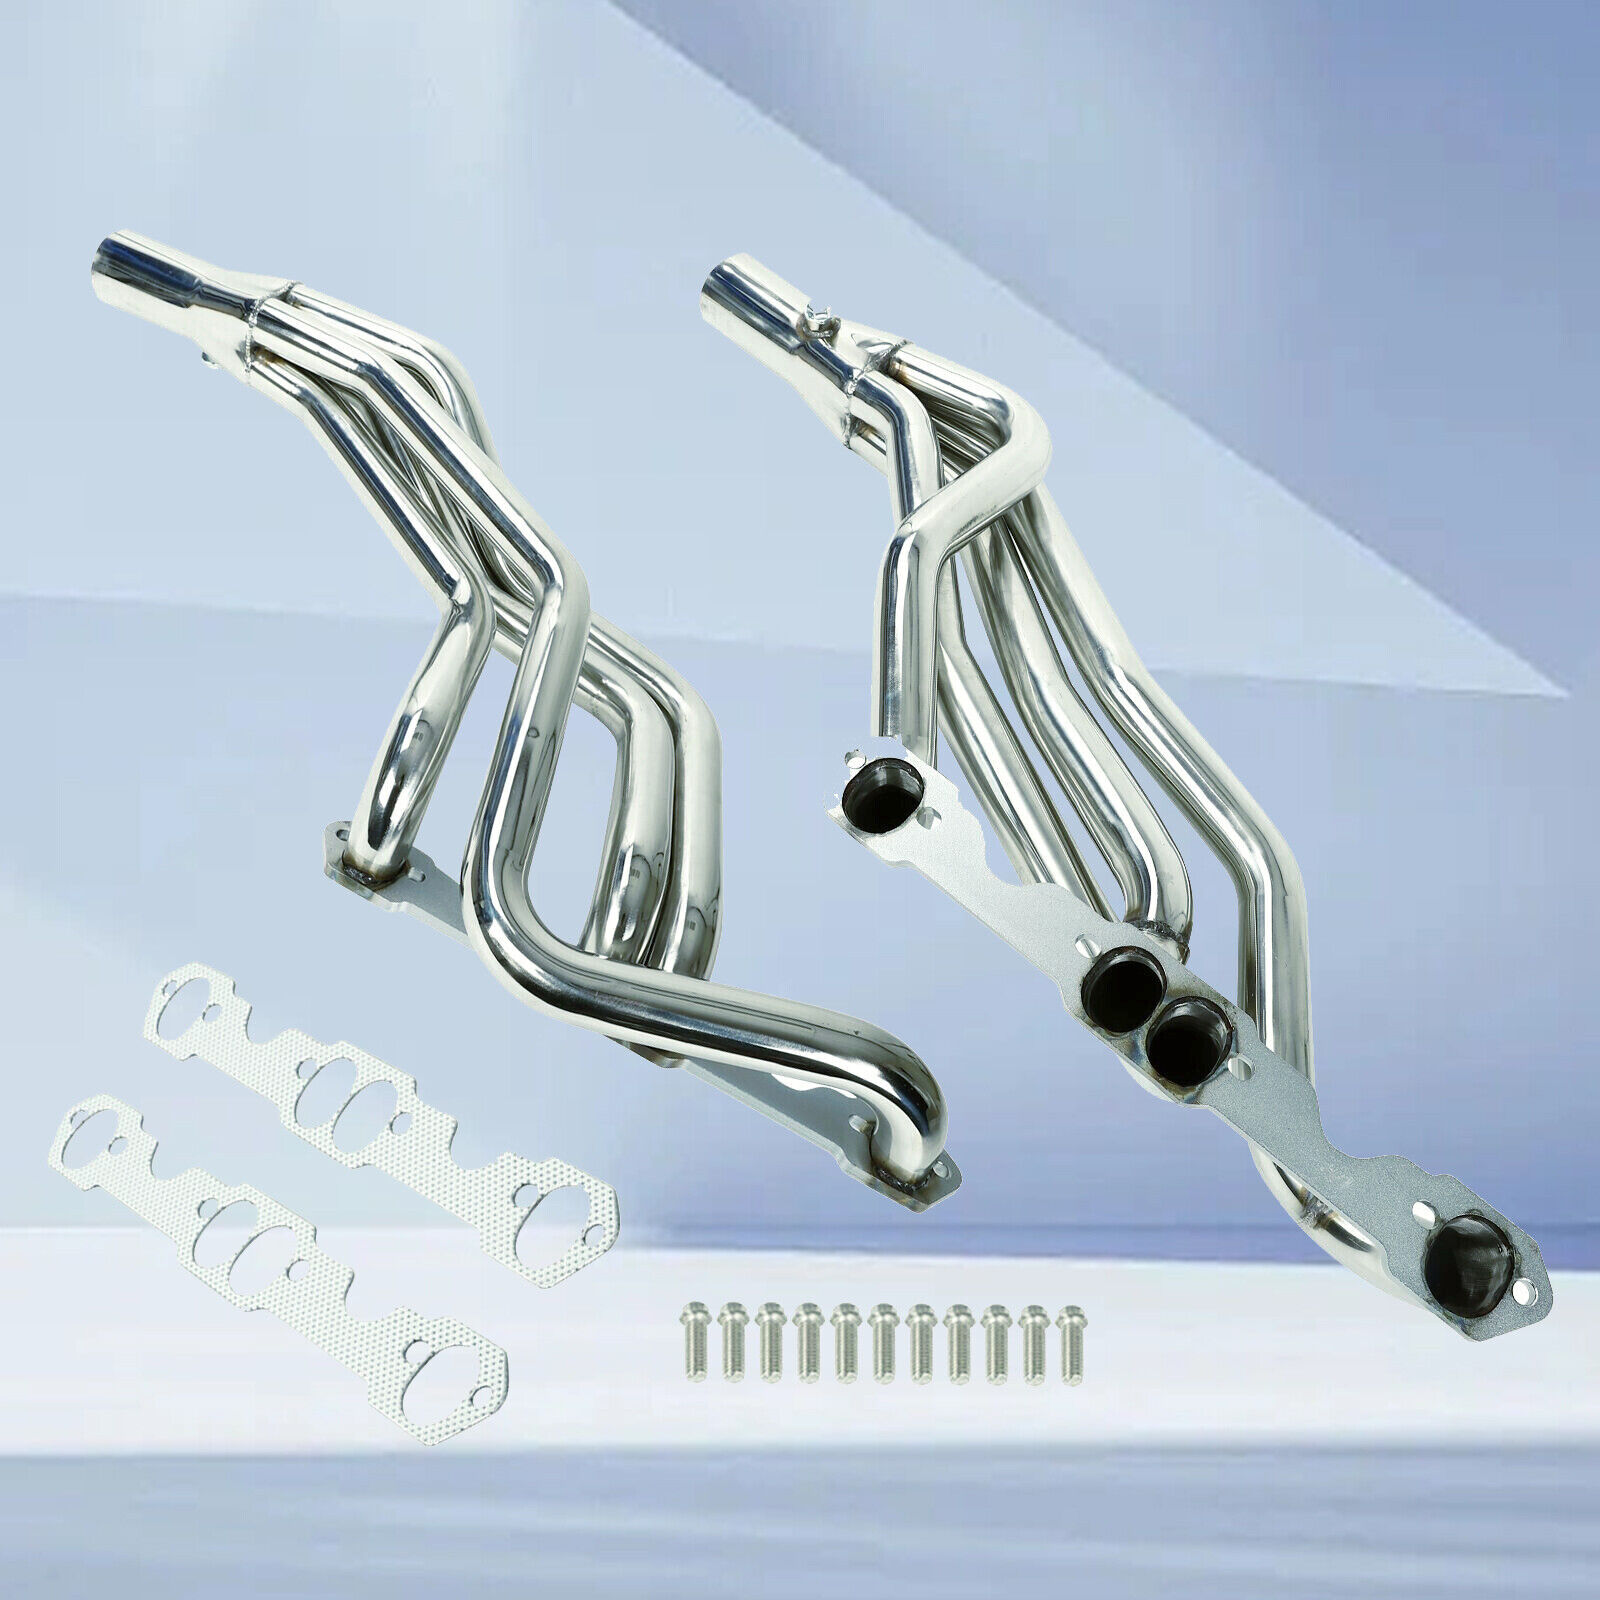 Stainless Steel Manifold Headers For 1993-97 Chevy Camaro/Firebird 5.7L LT1 V8s8